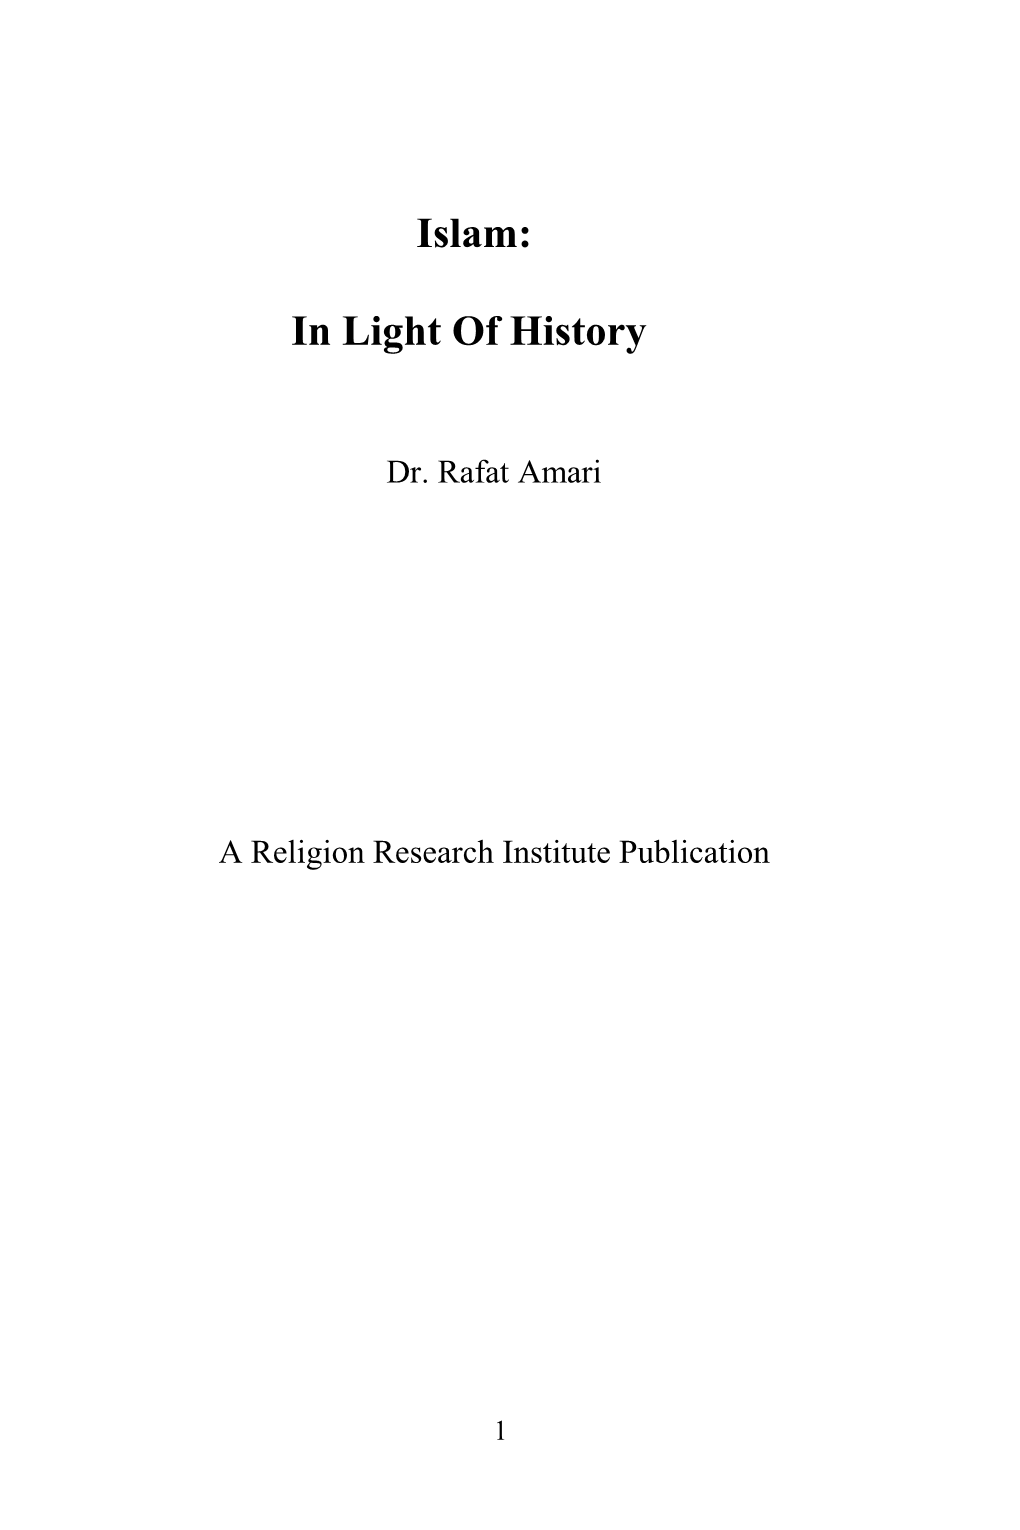 Islam: in Light of History, Has Been Prepared As an Introduction to Islam